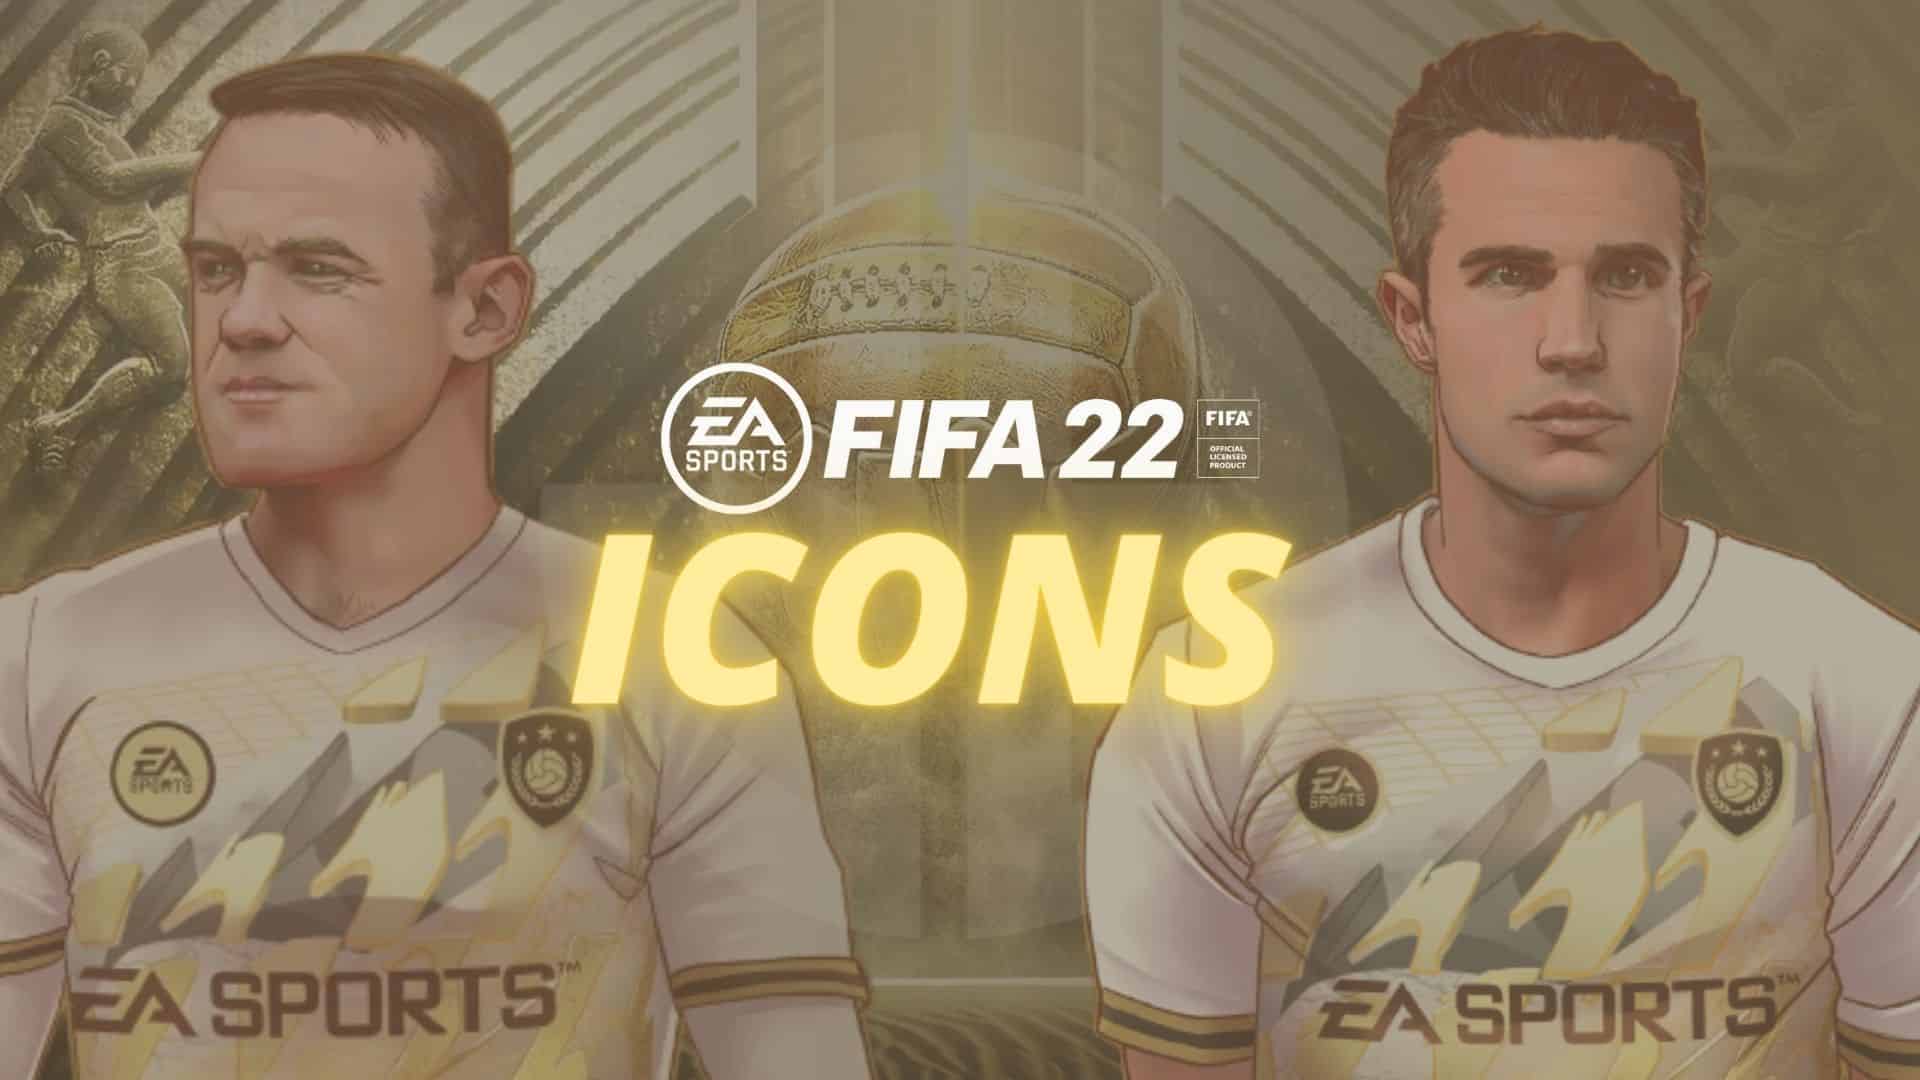 fifa 22 icons with rooney and van persie